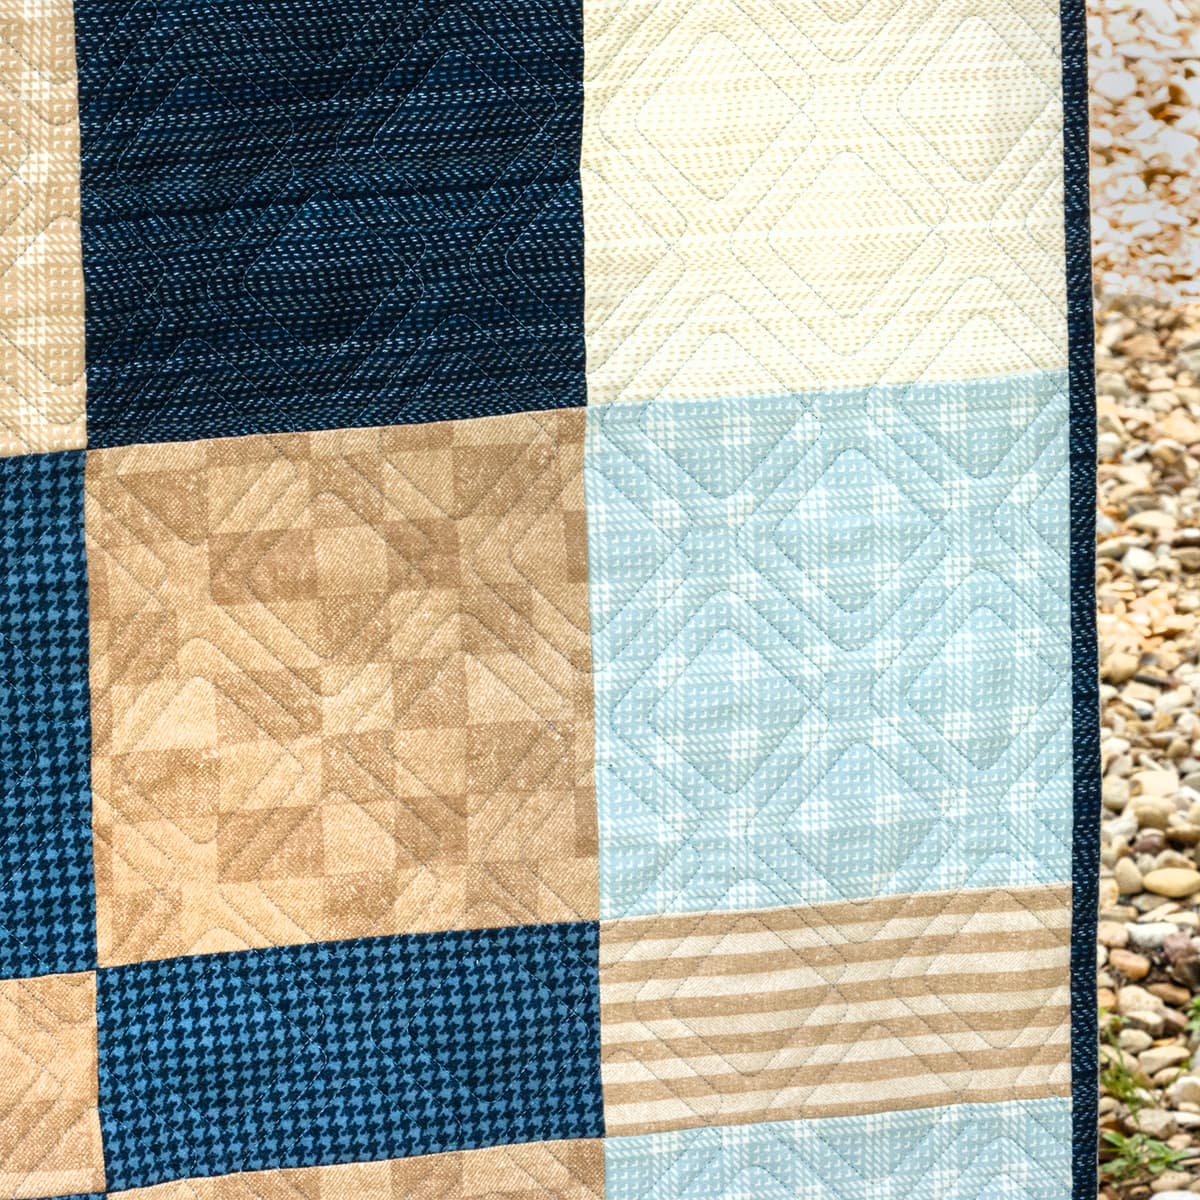 Flannel Plaid Patchwork Quilt - Diary of a Quilter - a quilt blog